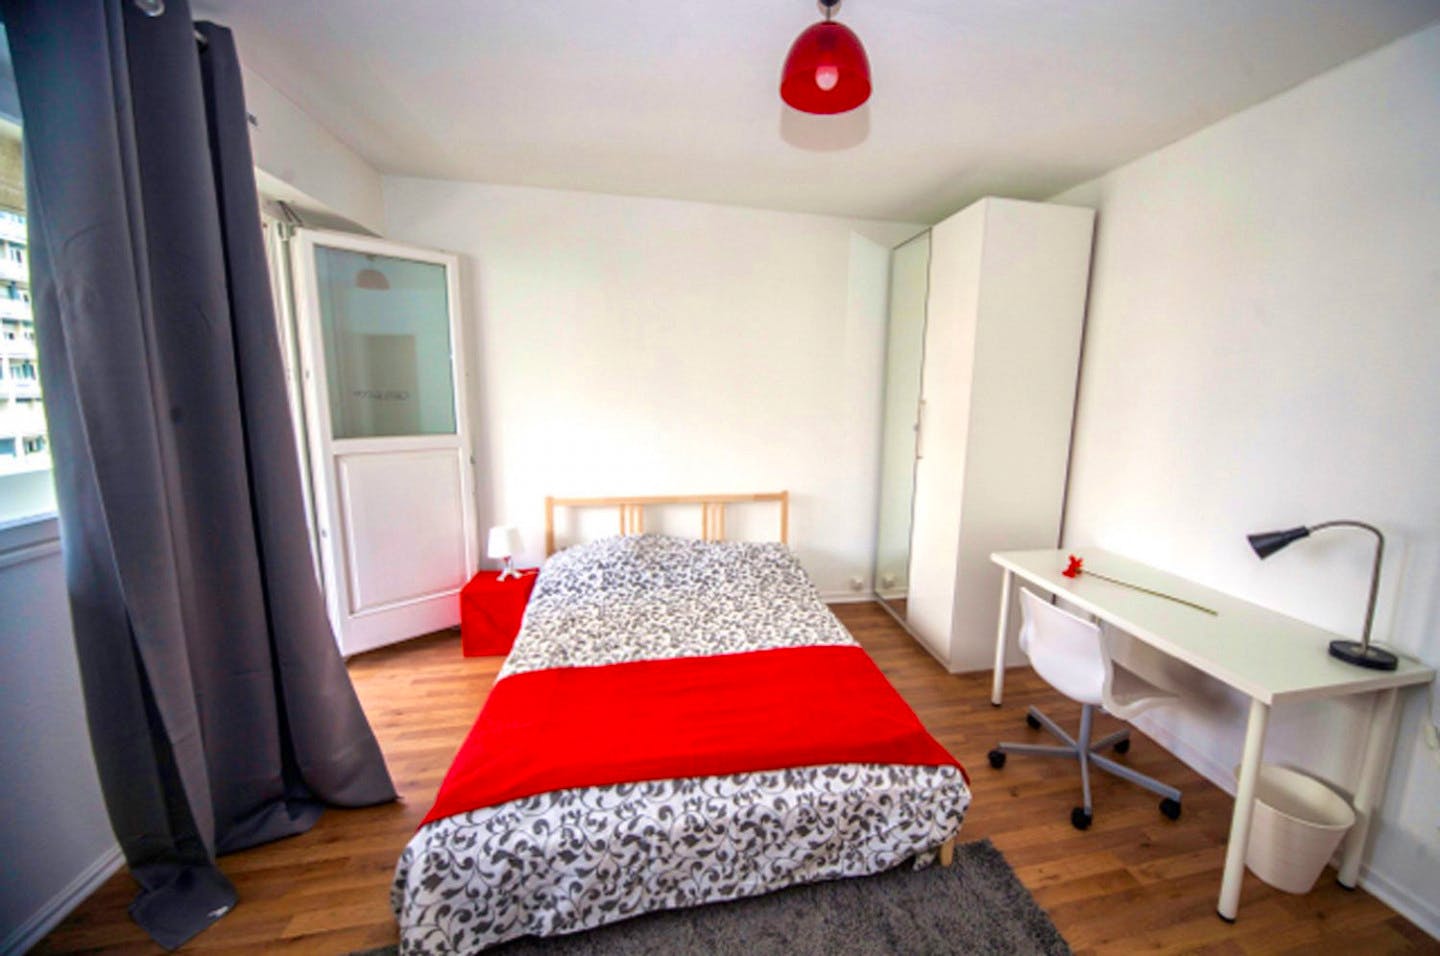 Large apartment ideally located in the student district of Strasbourg